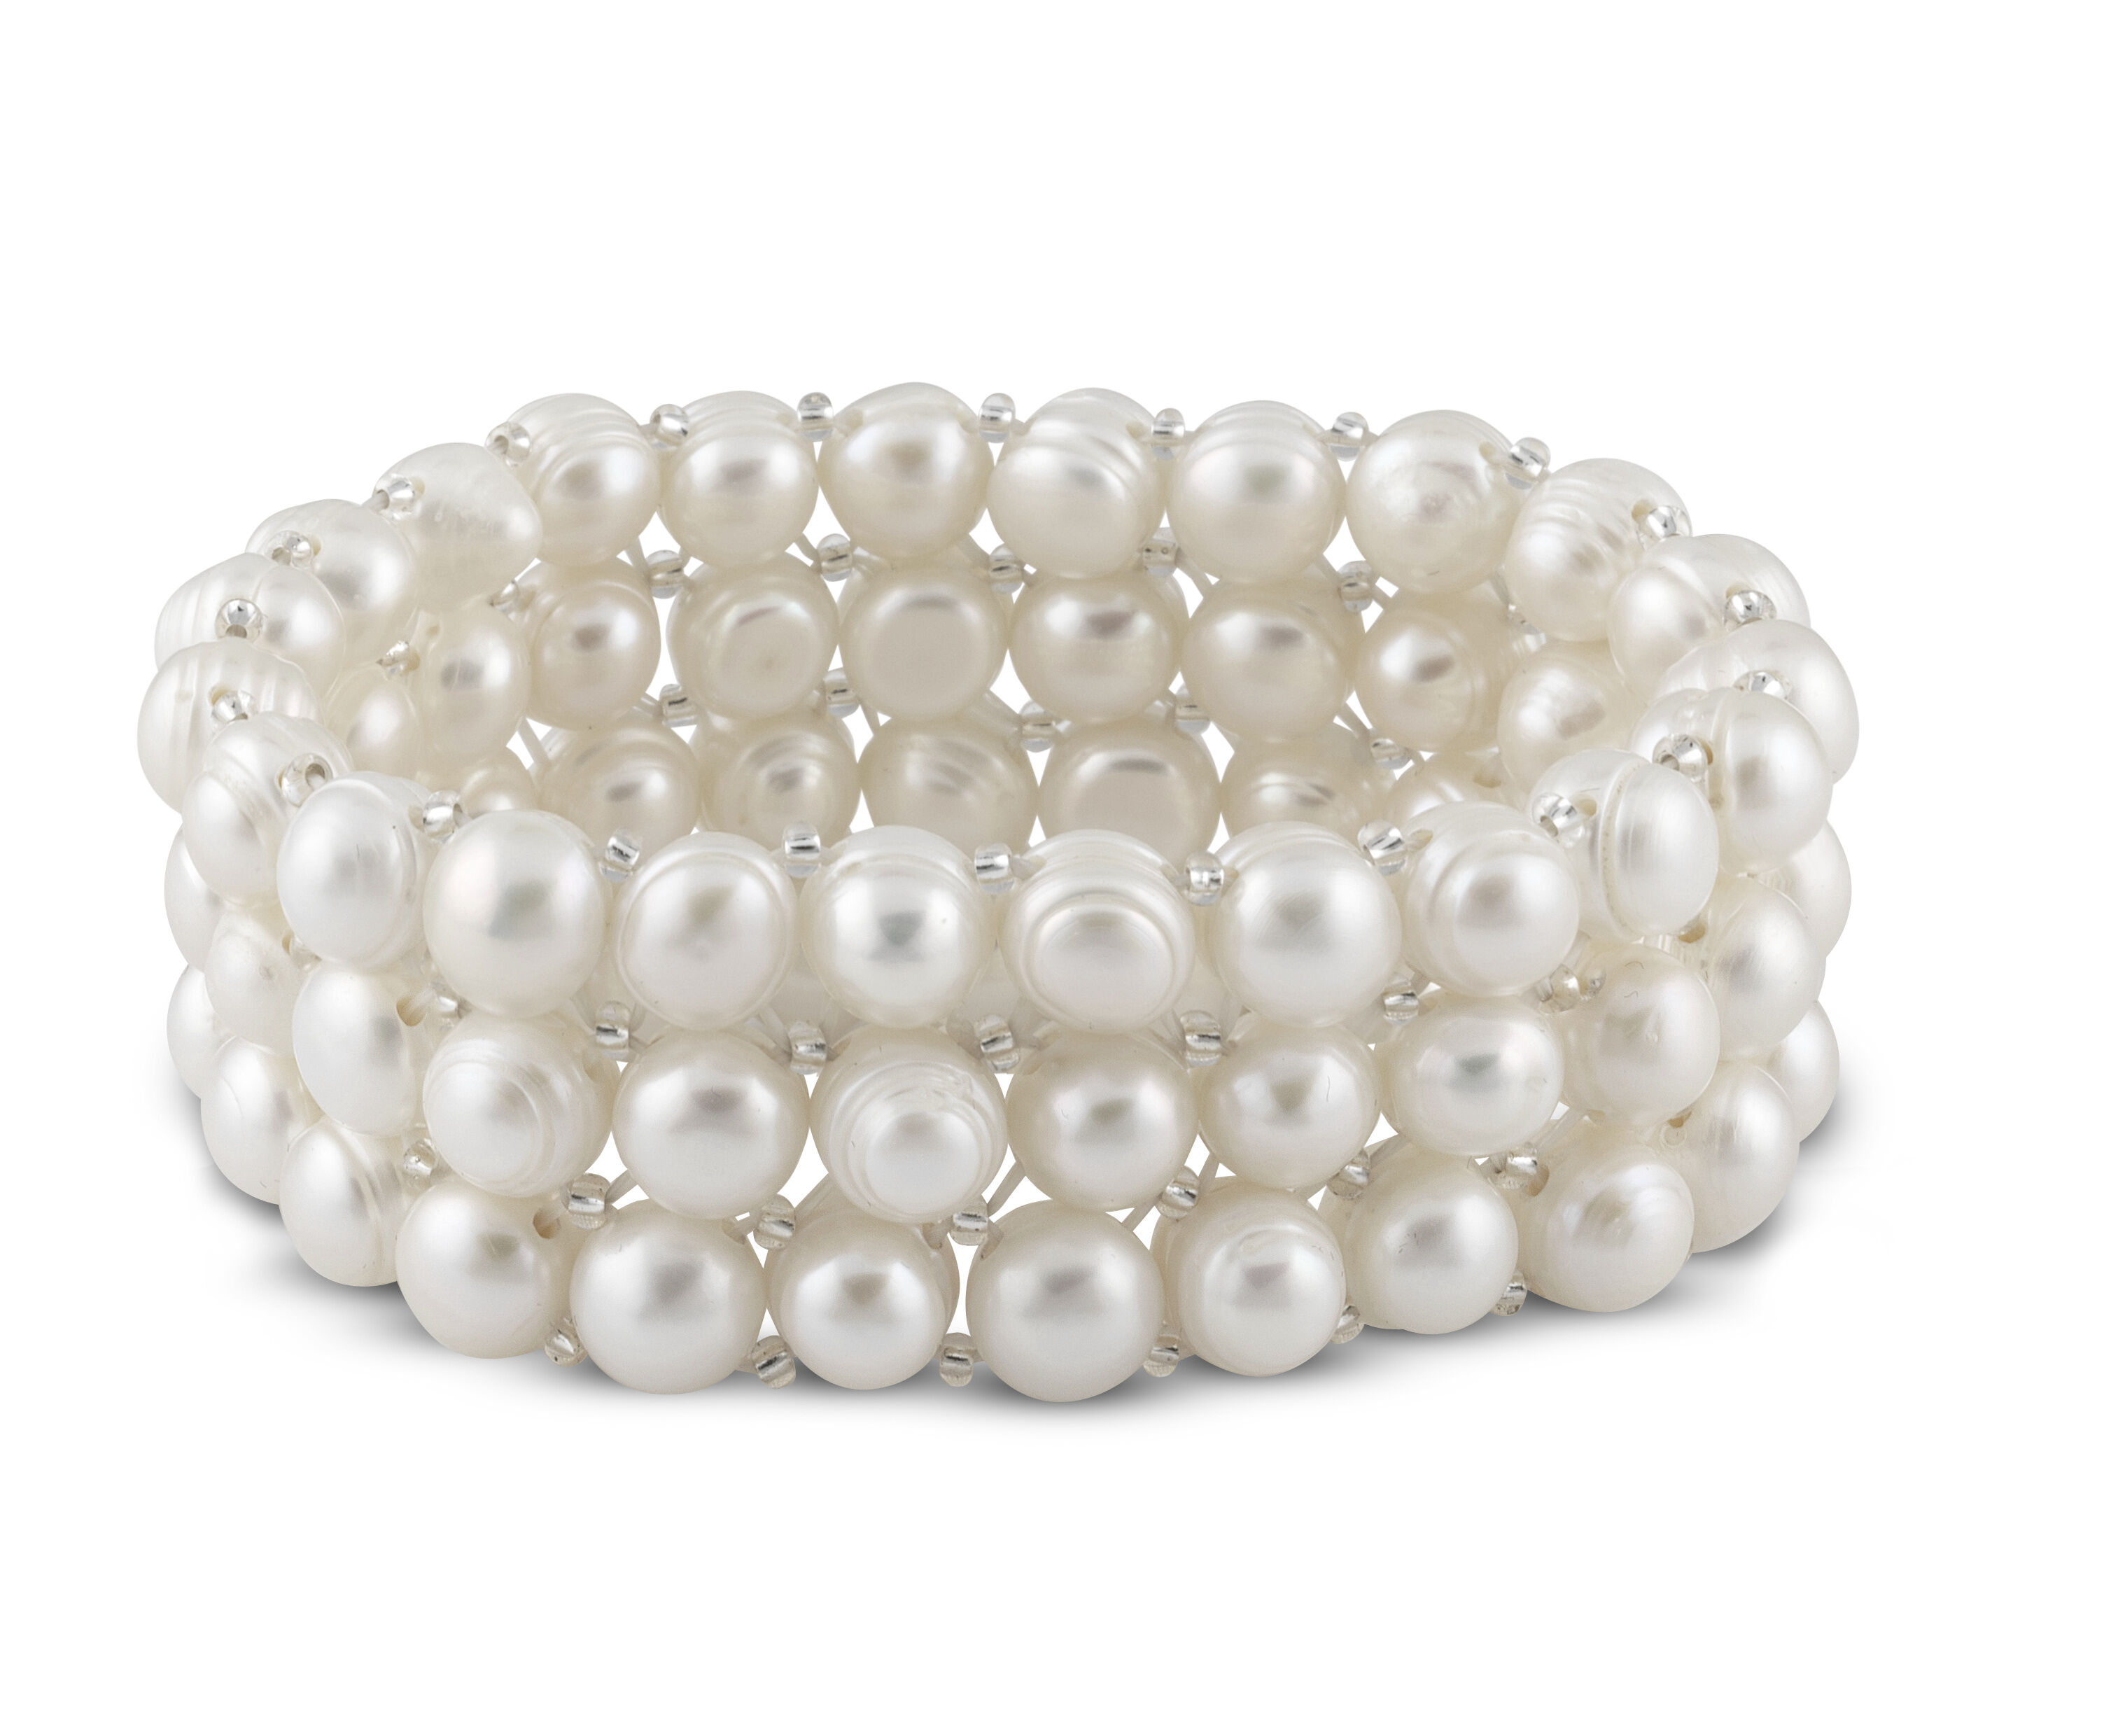 A Year of Pearl Essentials 6075 0023 i bracelet1